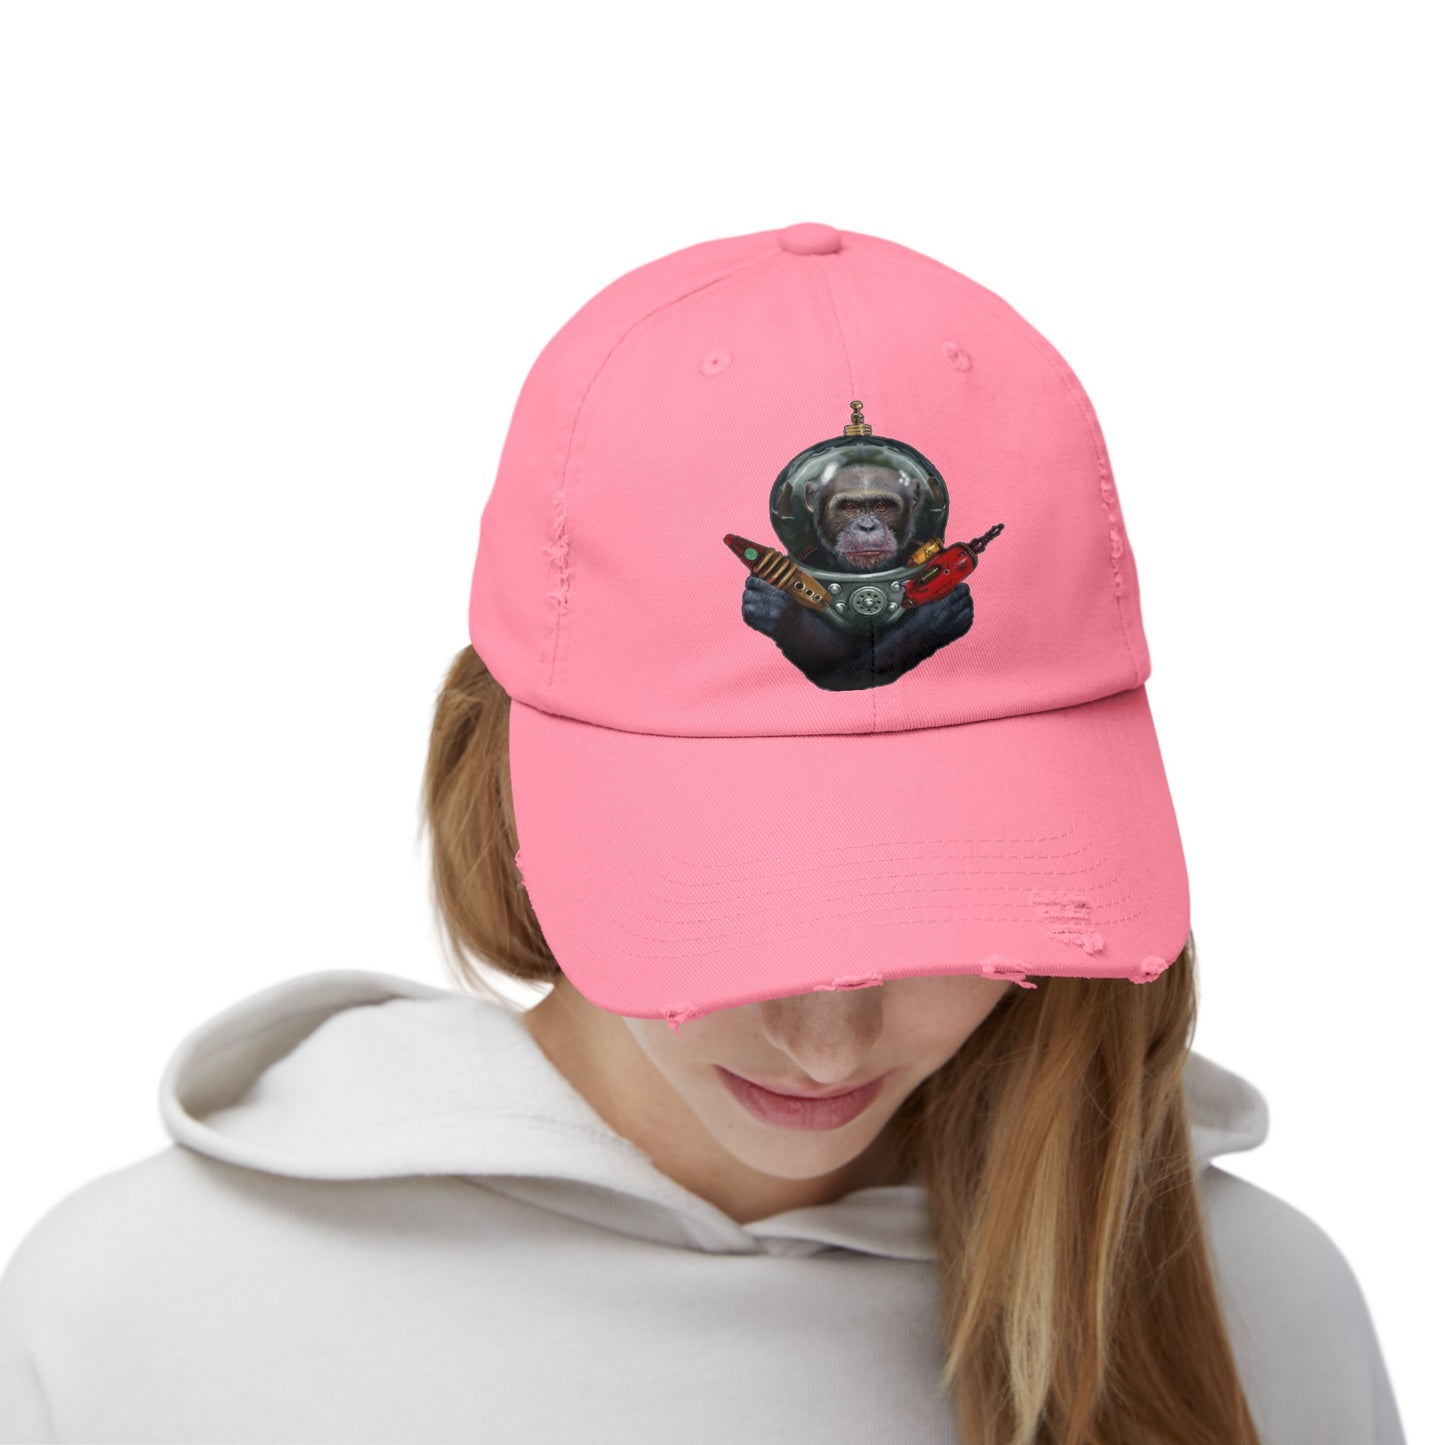 Tony South: "Slowly and Surely They Drew Their Plans Against Us" - Unisex Distressed Cap